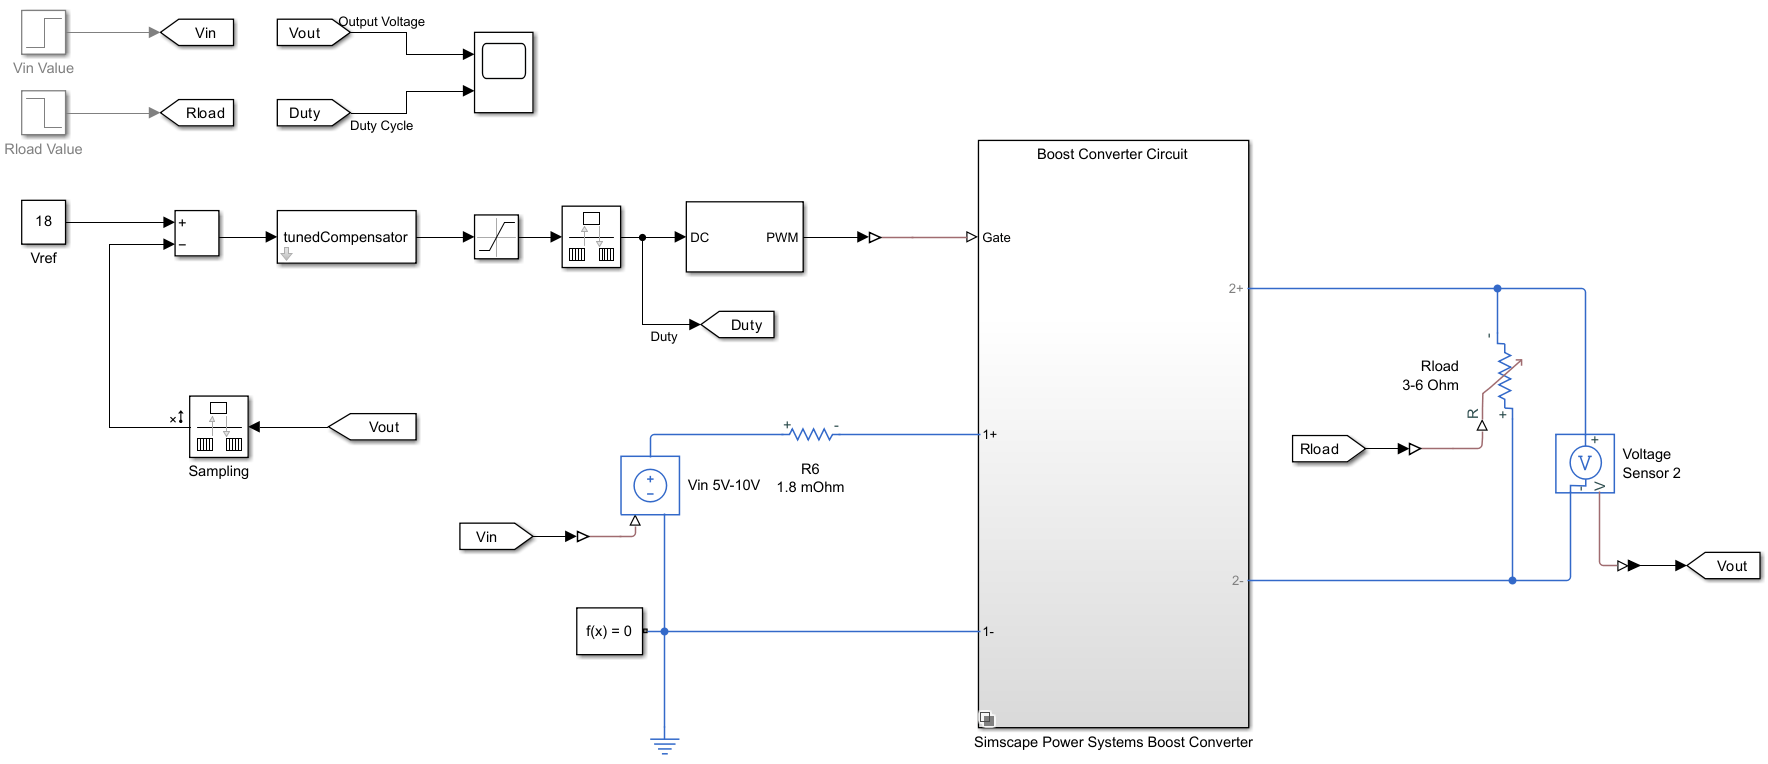 Simulink model of voltage controlled boost converter